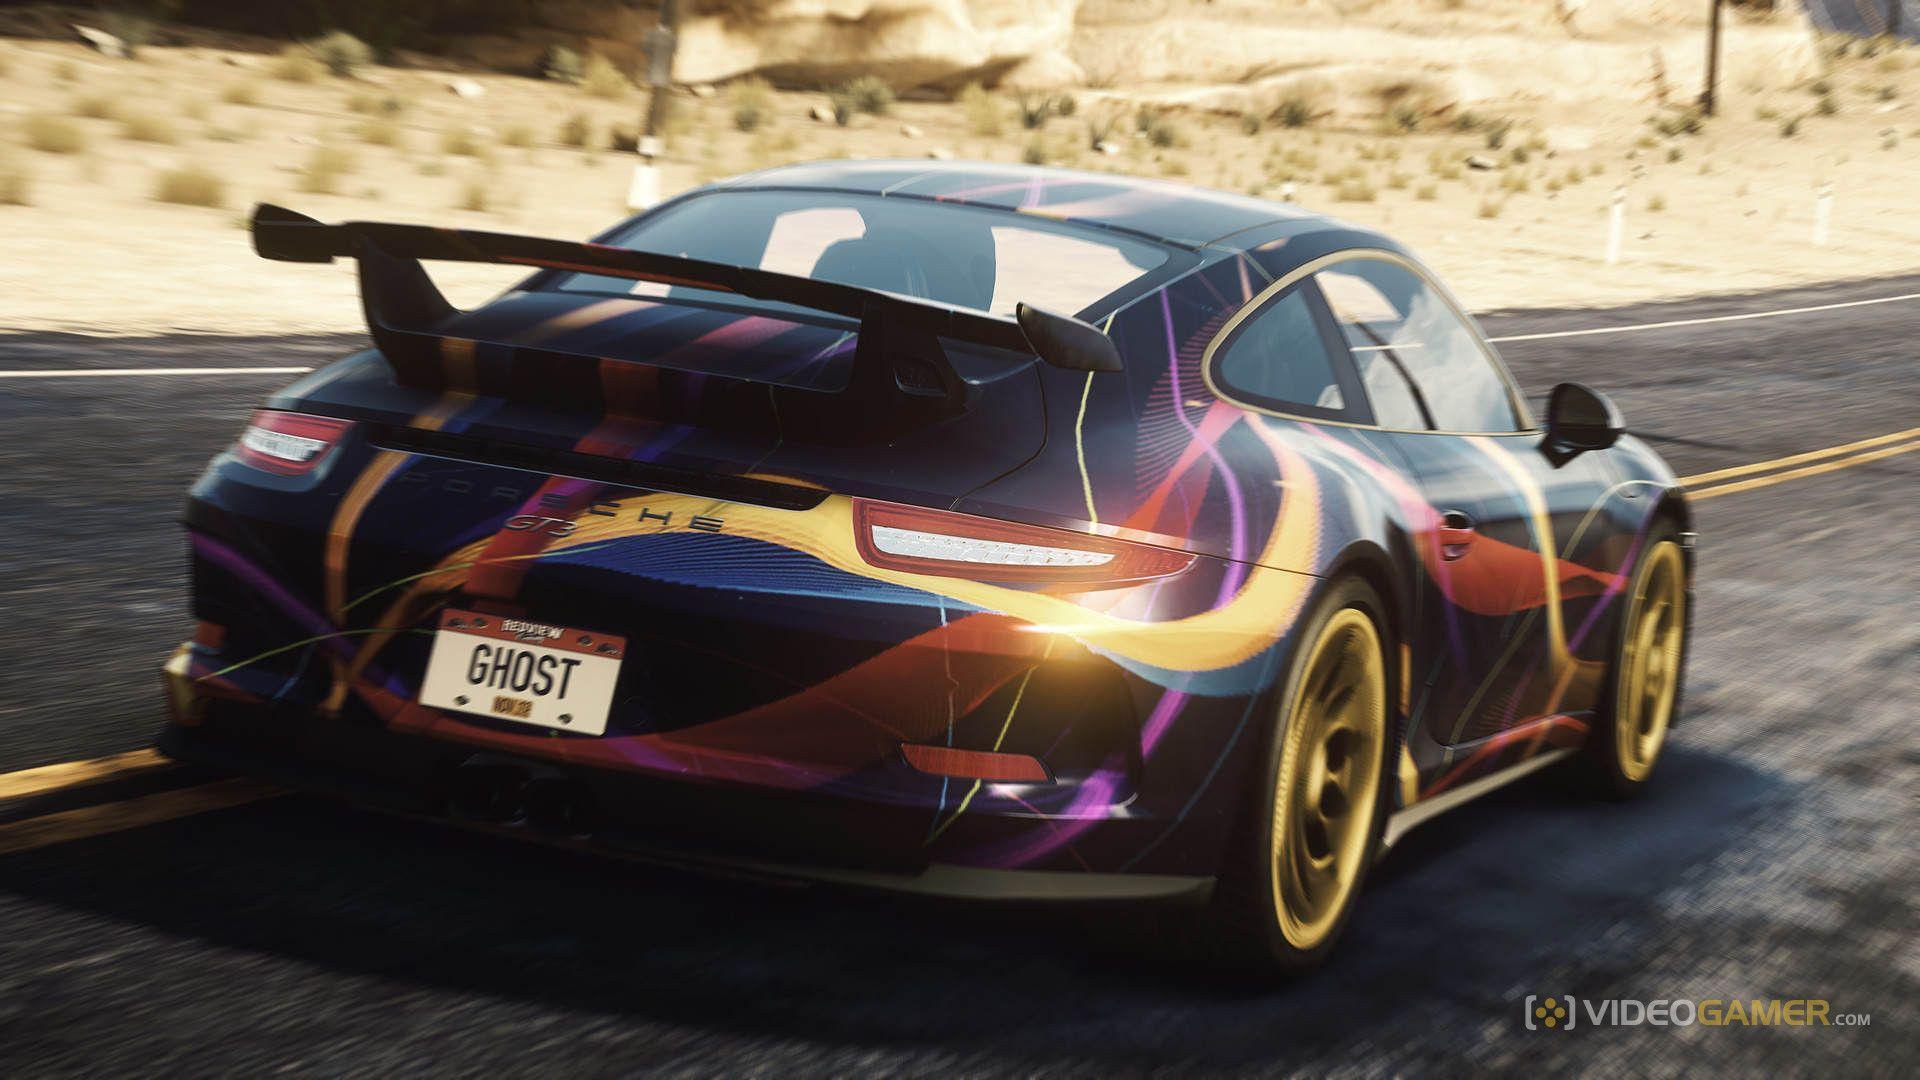 Need For Speed Underground 3: If it can sell 15m copies, we'd make